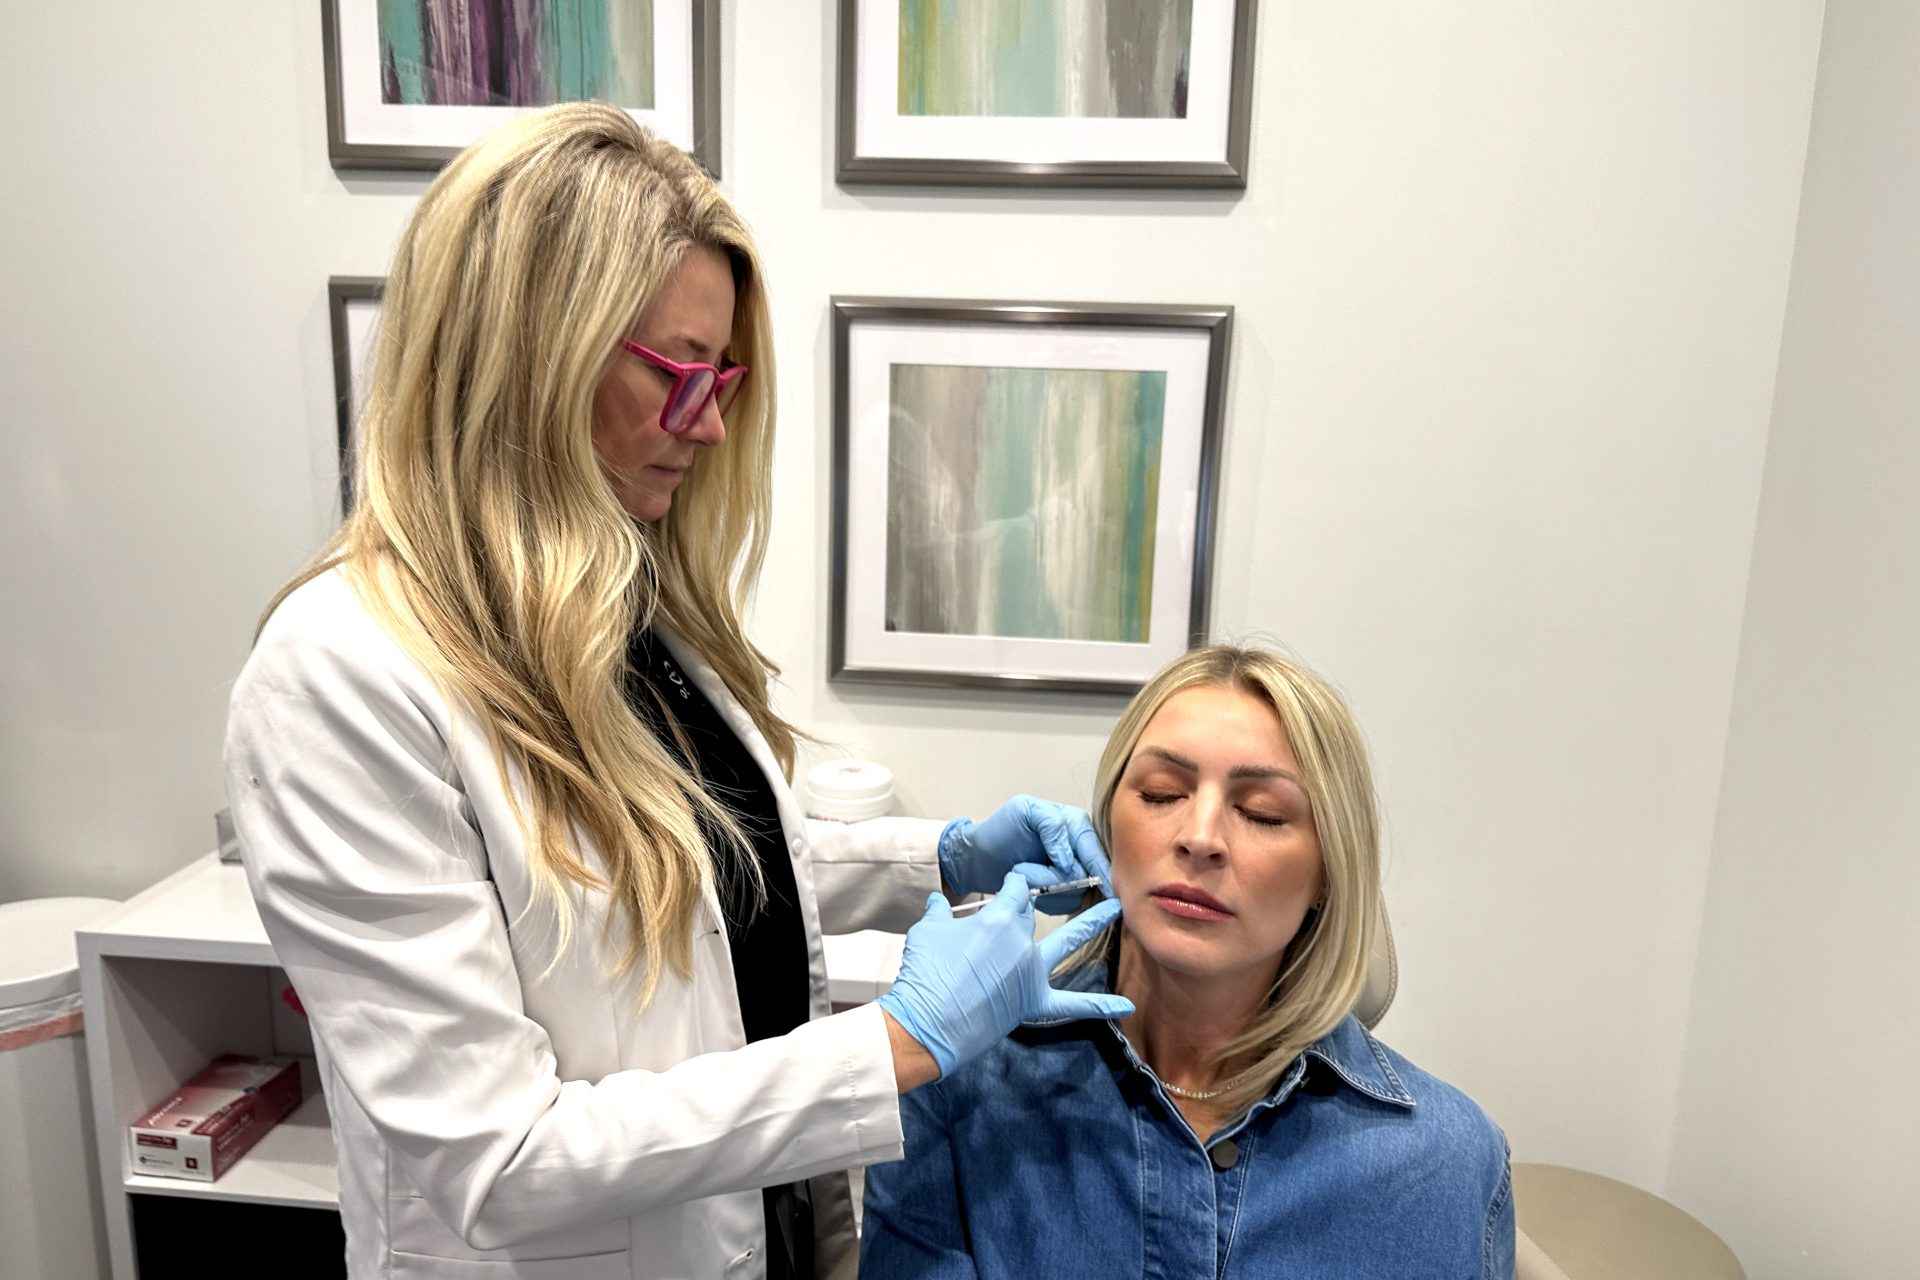 Expert female orthodontic doctor with blonde hair providing compassionate and professional TMJ treatment to a blonde patient, ensuring personalized care and optimal oral health.